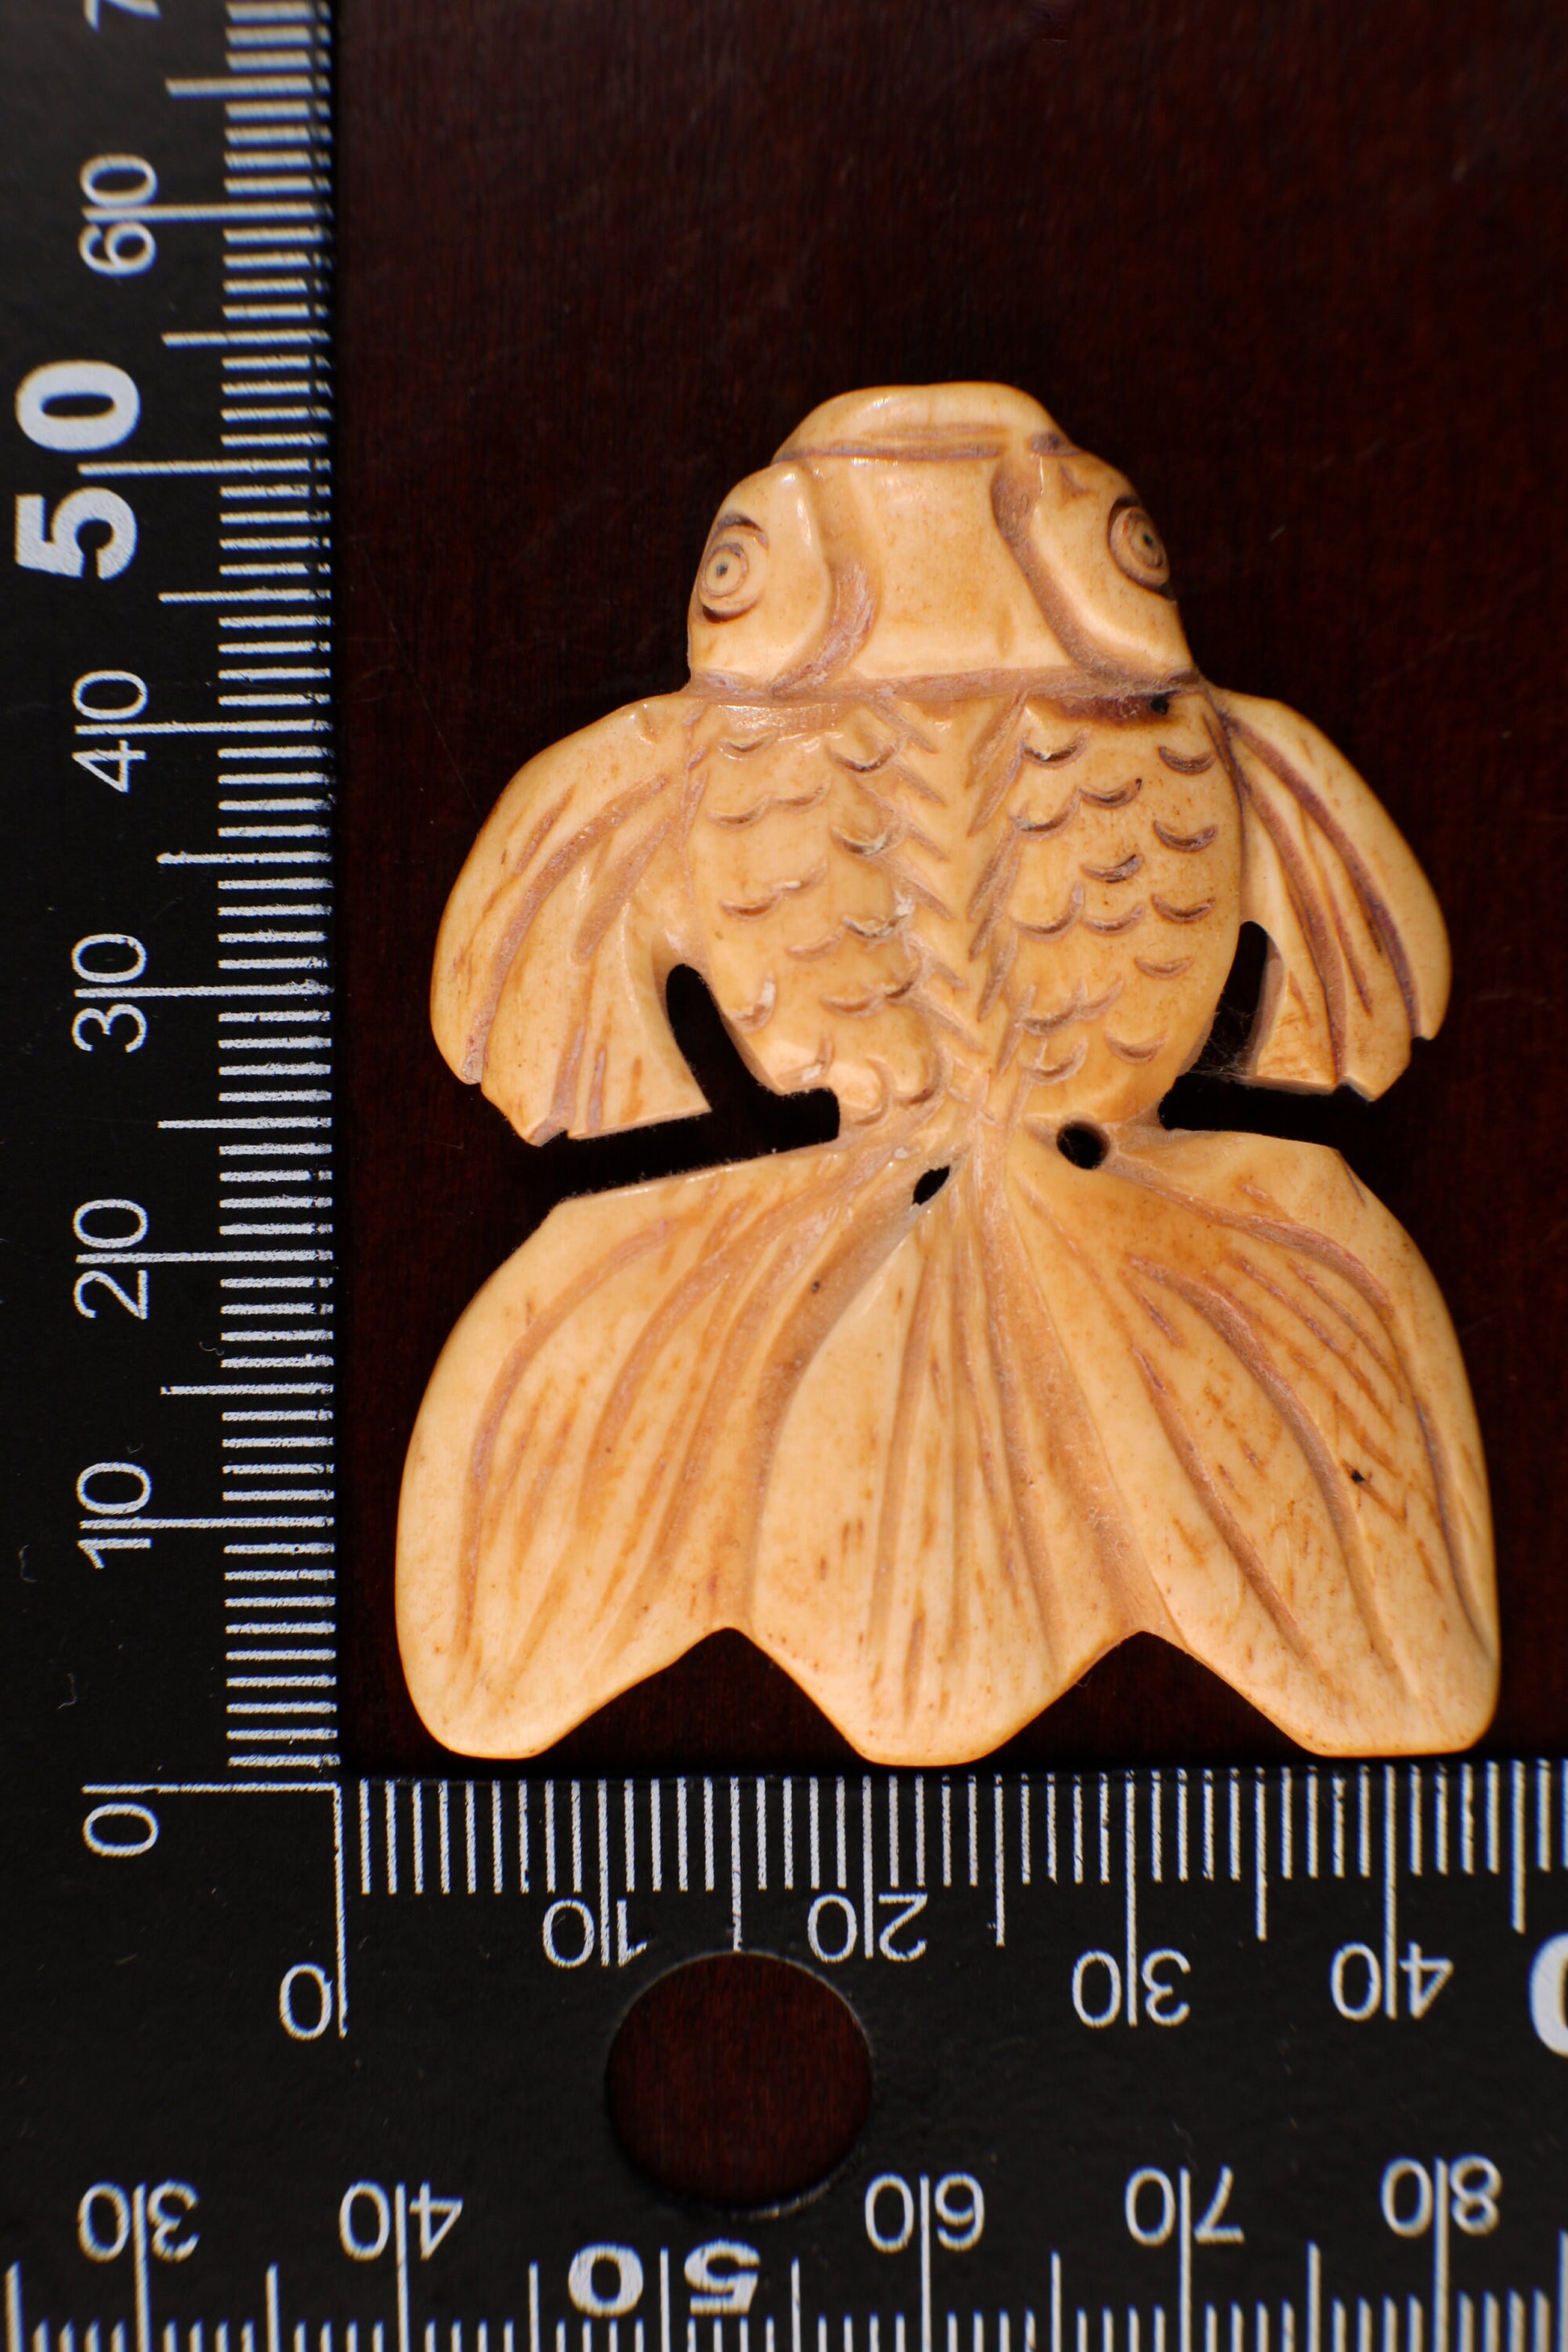 Carved Buffalo Bone Large Gold Fish, 52x42mm Hand Crafted Double Sided Animal Figurine Drilled Bead, Art Deco